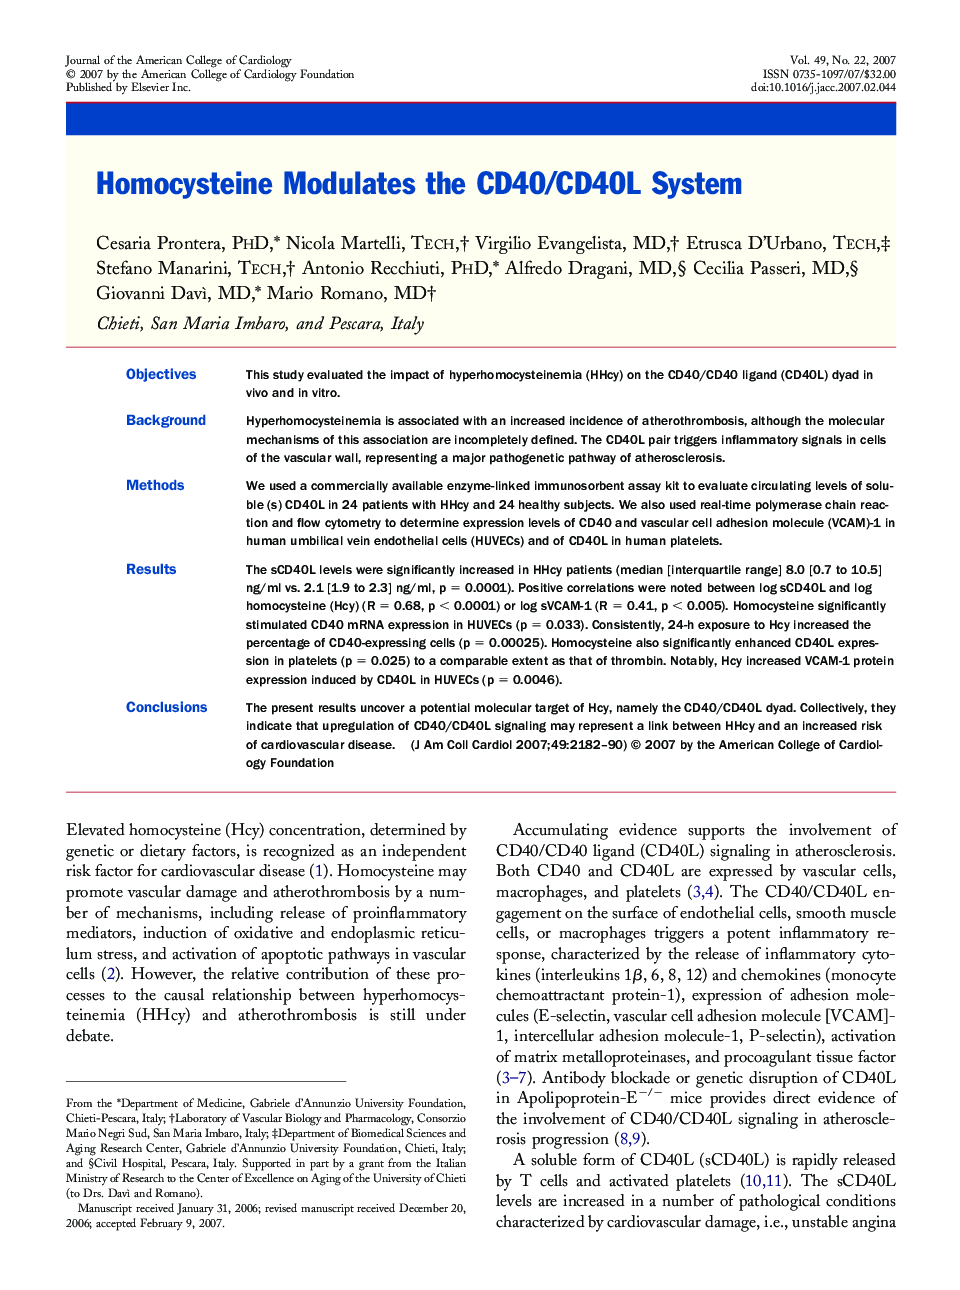 Homocysteine Modulates the CD40/CD40L System 